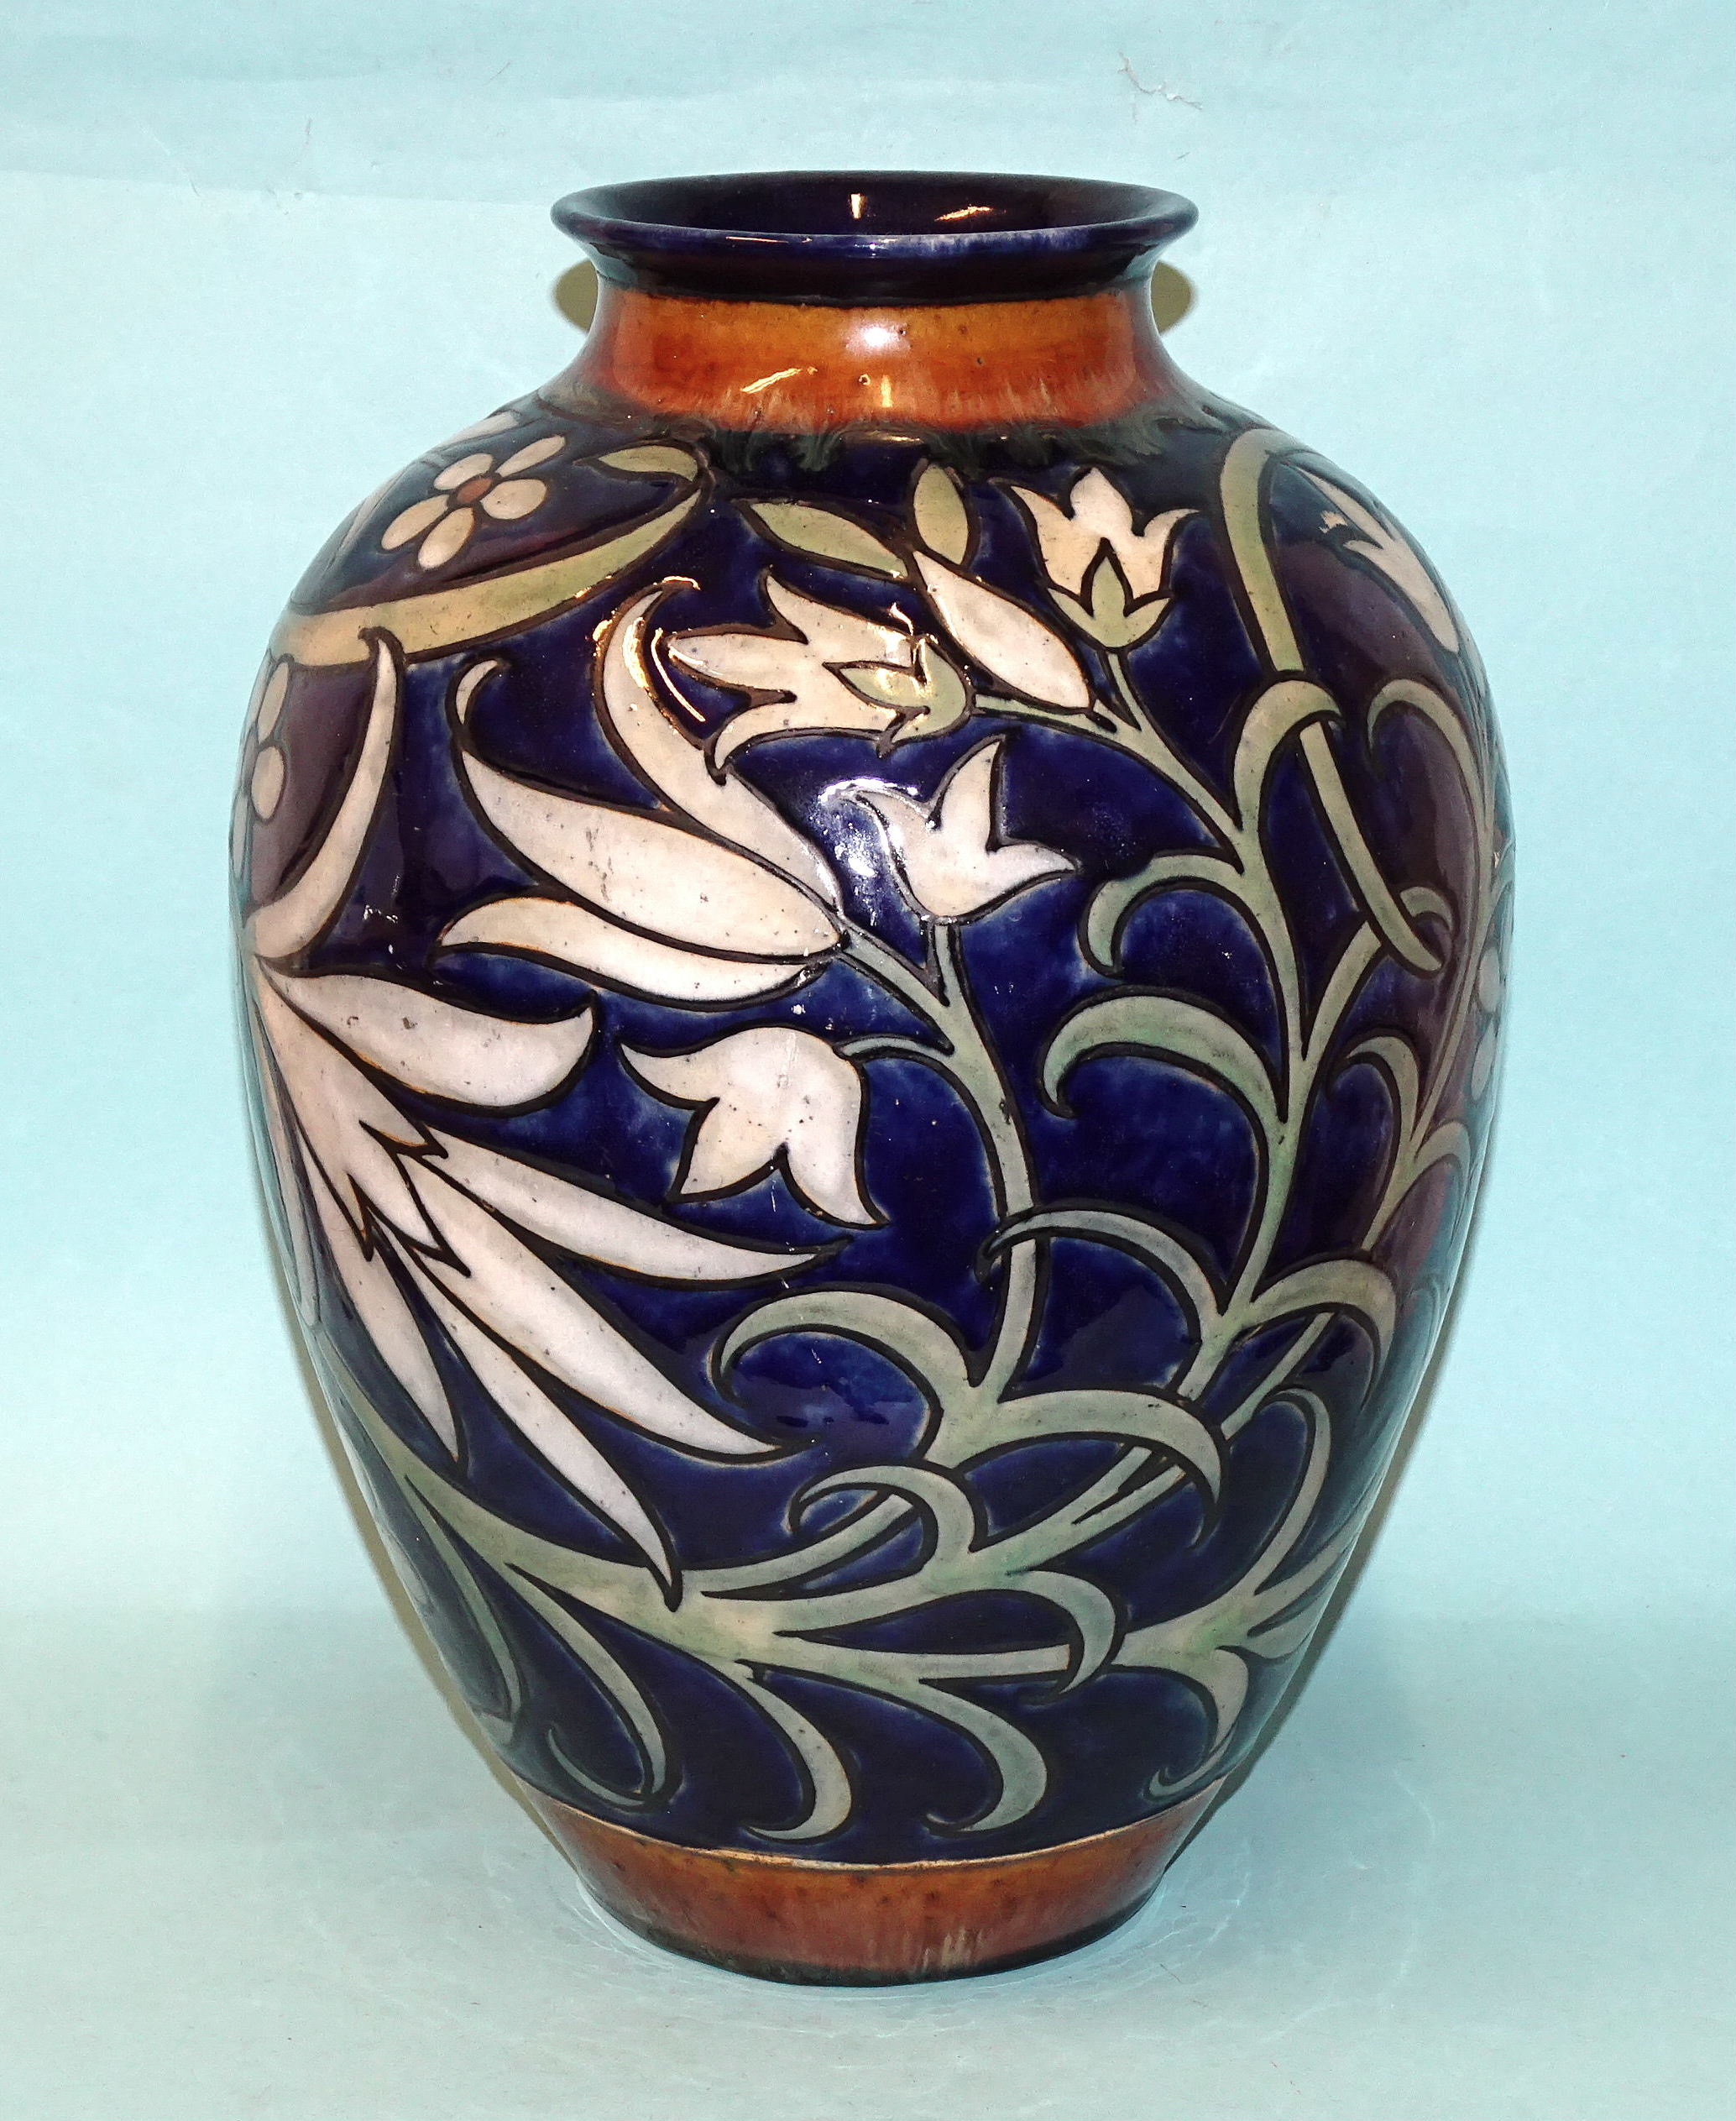 A Royal Doulton stoneware baluster-shaped vase by Harry Simeon, with stylised floral and leaf - Image 2 of 4